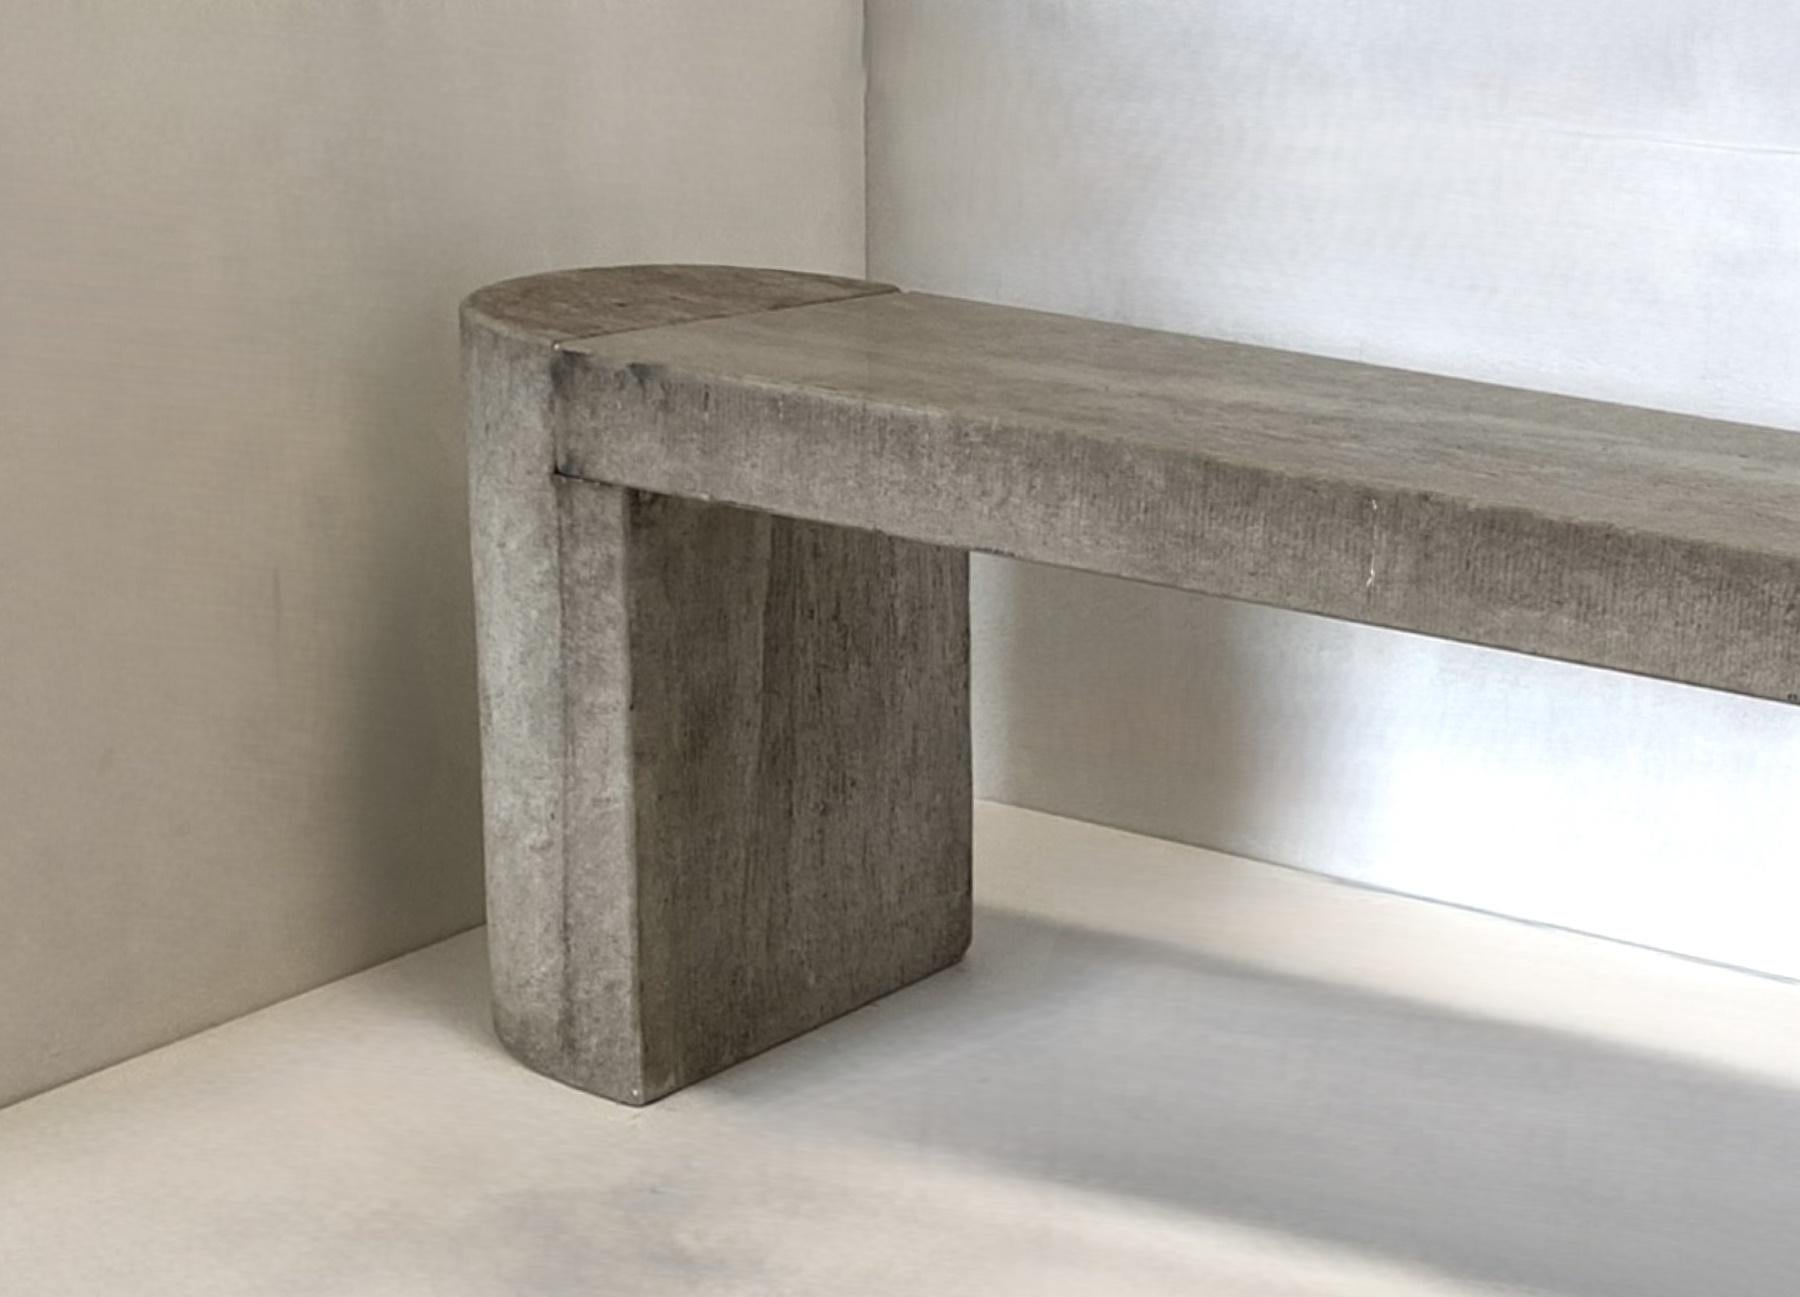 Modernist Polished Stone Concrete Bench Seat with Aged Patina For Sale 2